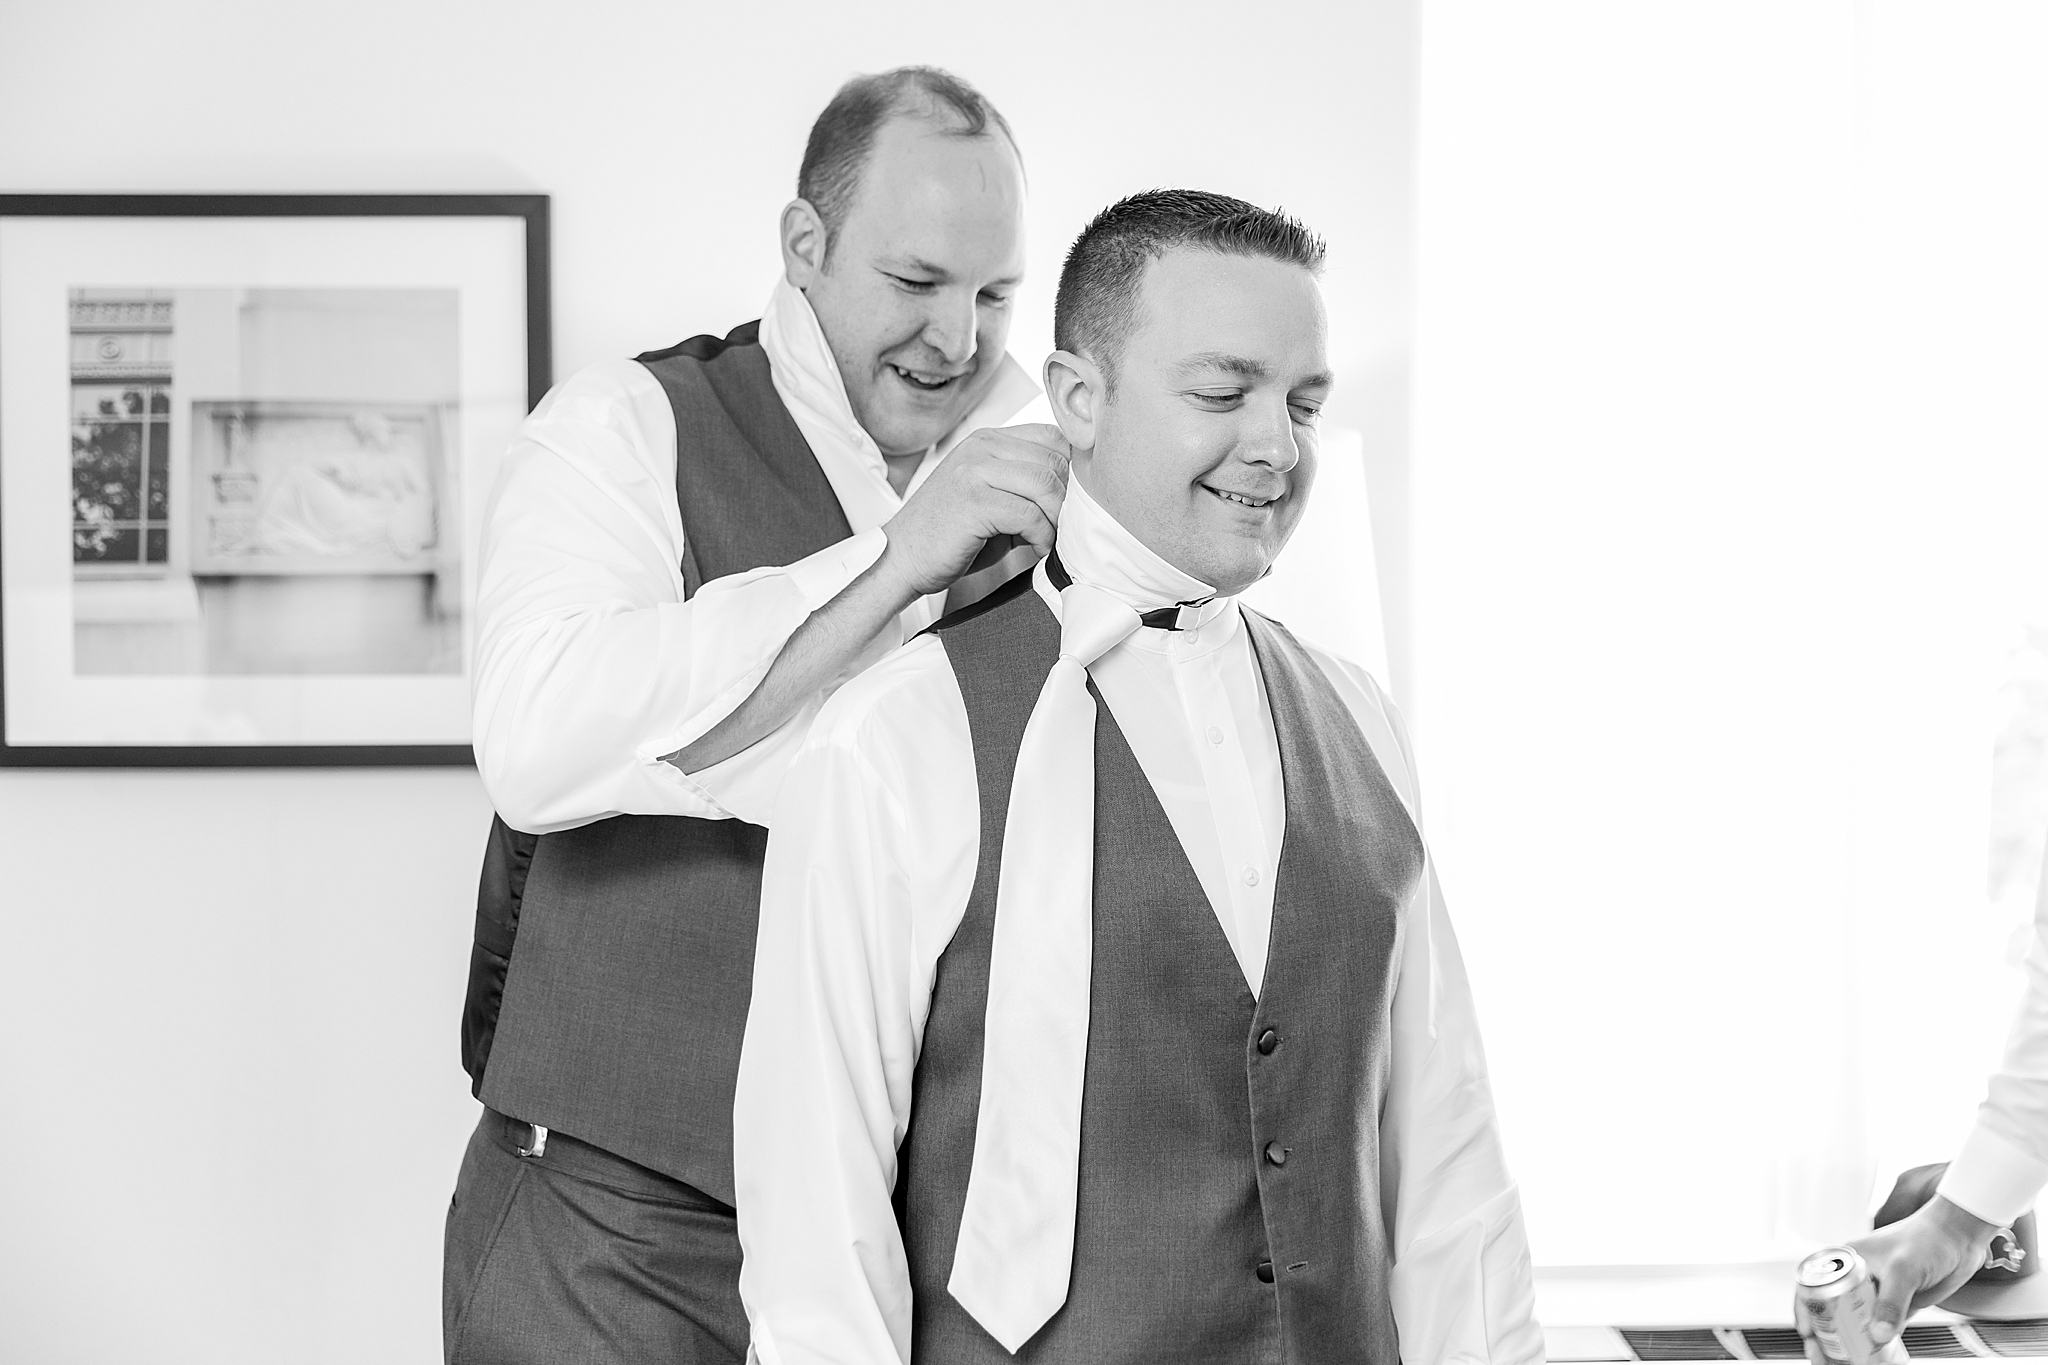 modern-romantic-wedding-photography-at-webers-in-ann-arbor-michigan-by-courtney-carolyn-photography_0005.jpg